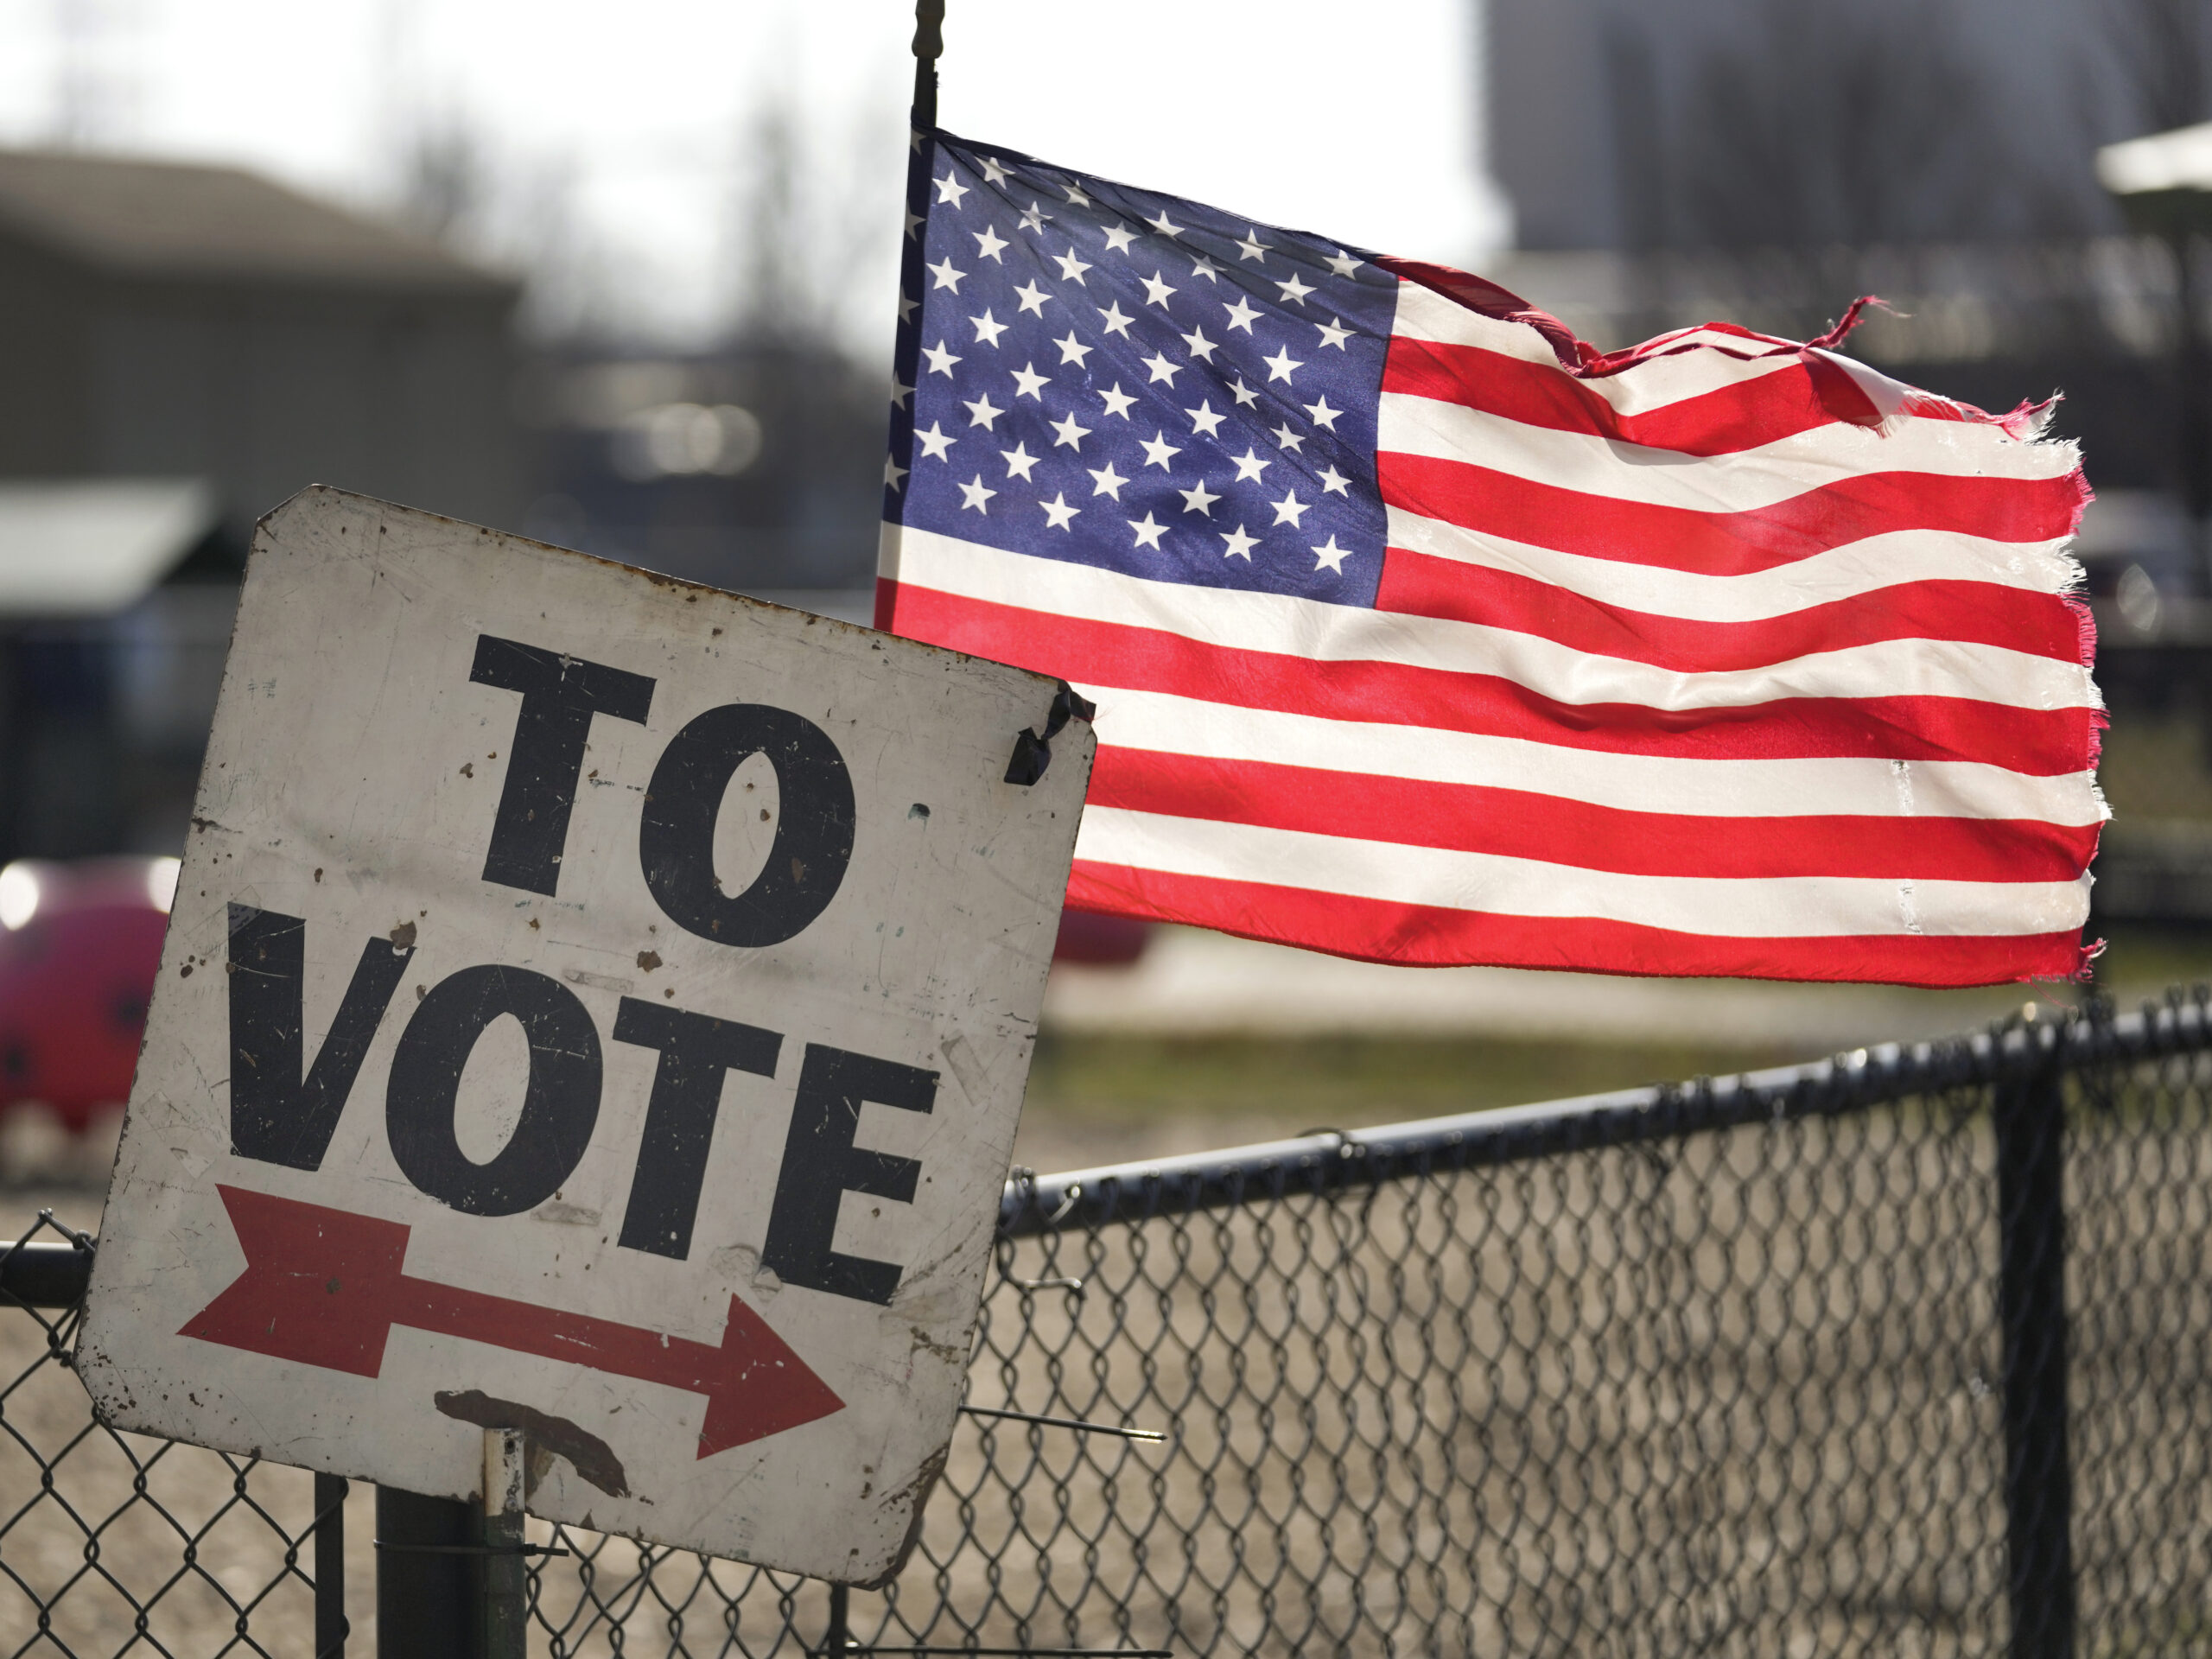 In one of the contests ahead of Super Tuesday on March 5, a vote sign and American flag are shown outside a Michigan primary election location in Dearborn, Mich., on Feb. 27.